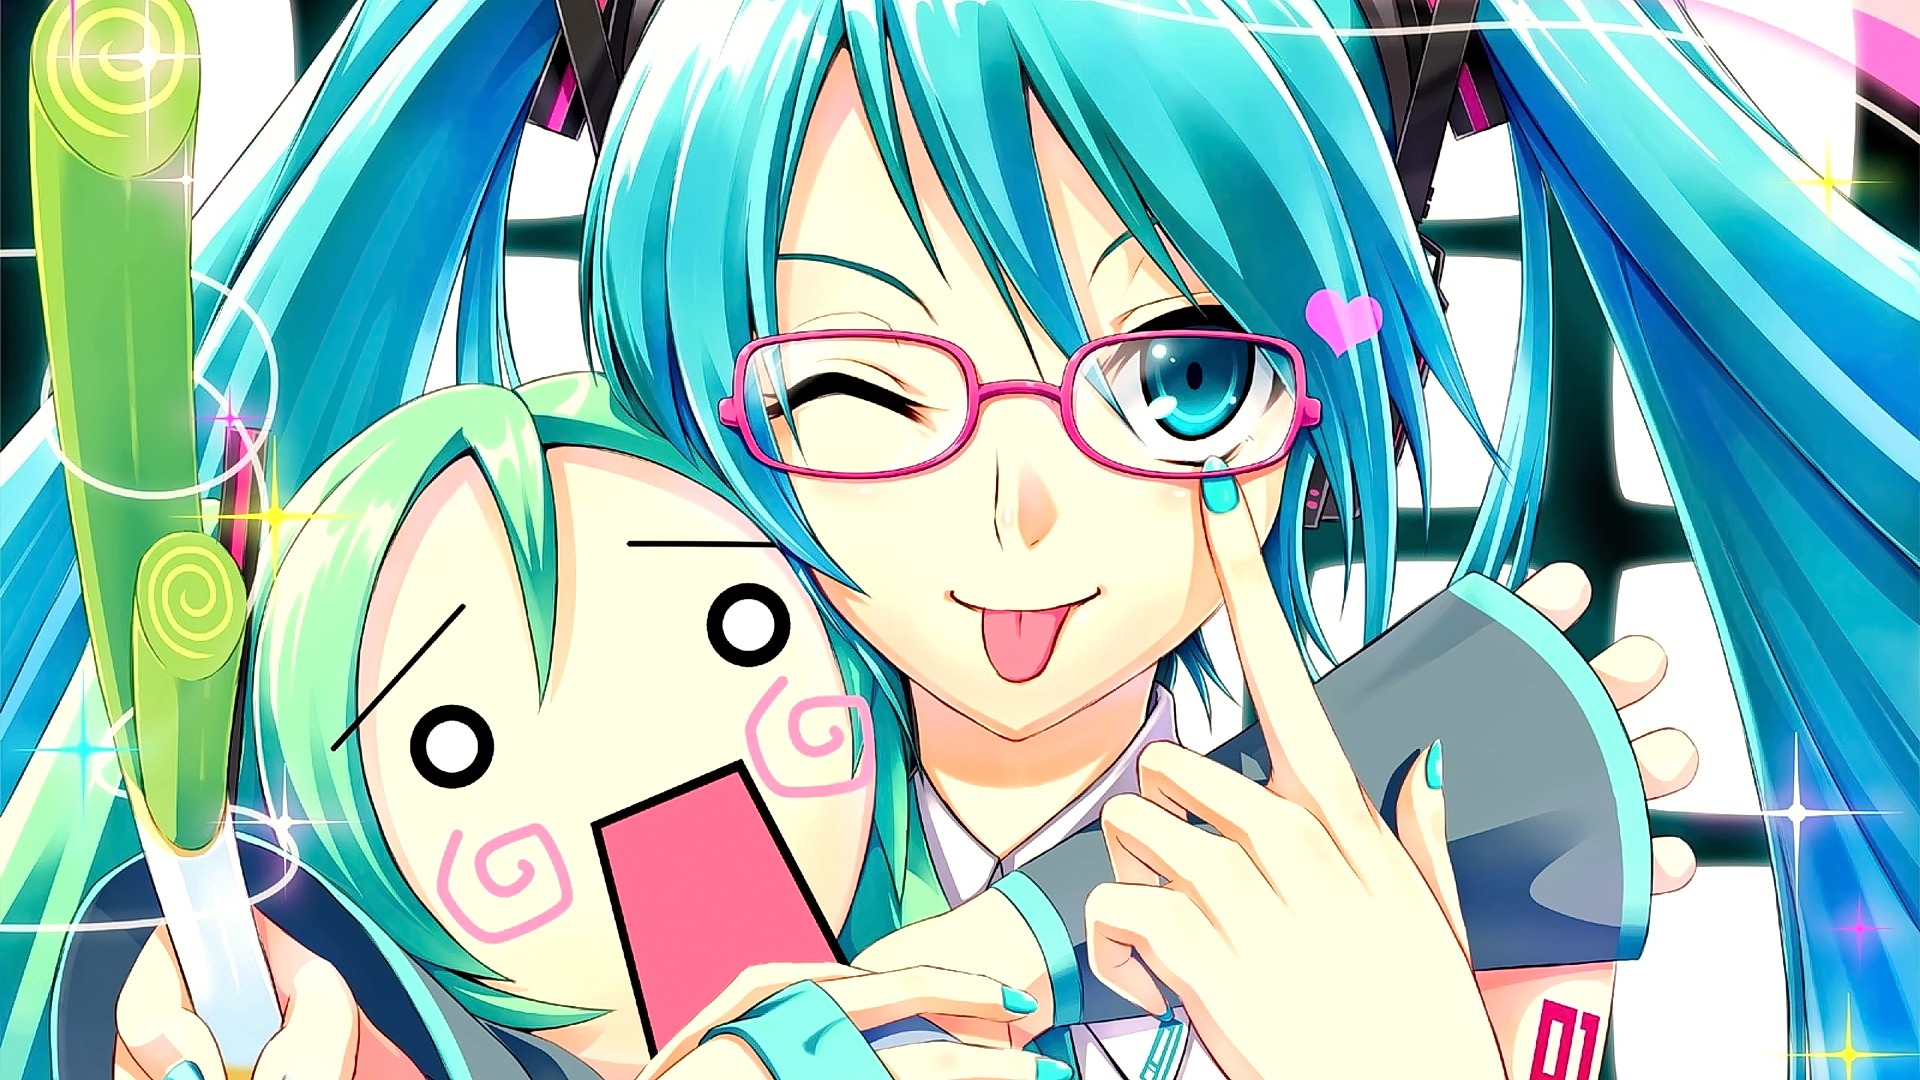 Anime 1920x1080 anime anime girls Vocaloid glasses Hatsune Miku cyan hair face closeup women with glasses cyan nails painted nails heart (design) tongues tongue out one eye closed blue eyes